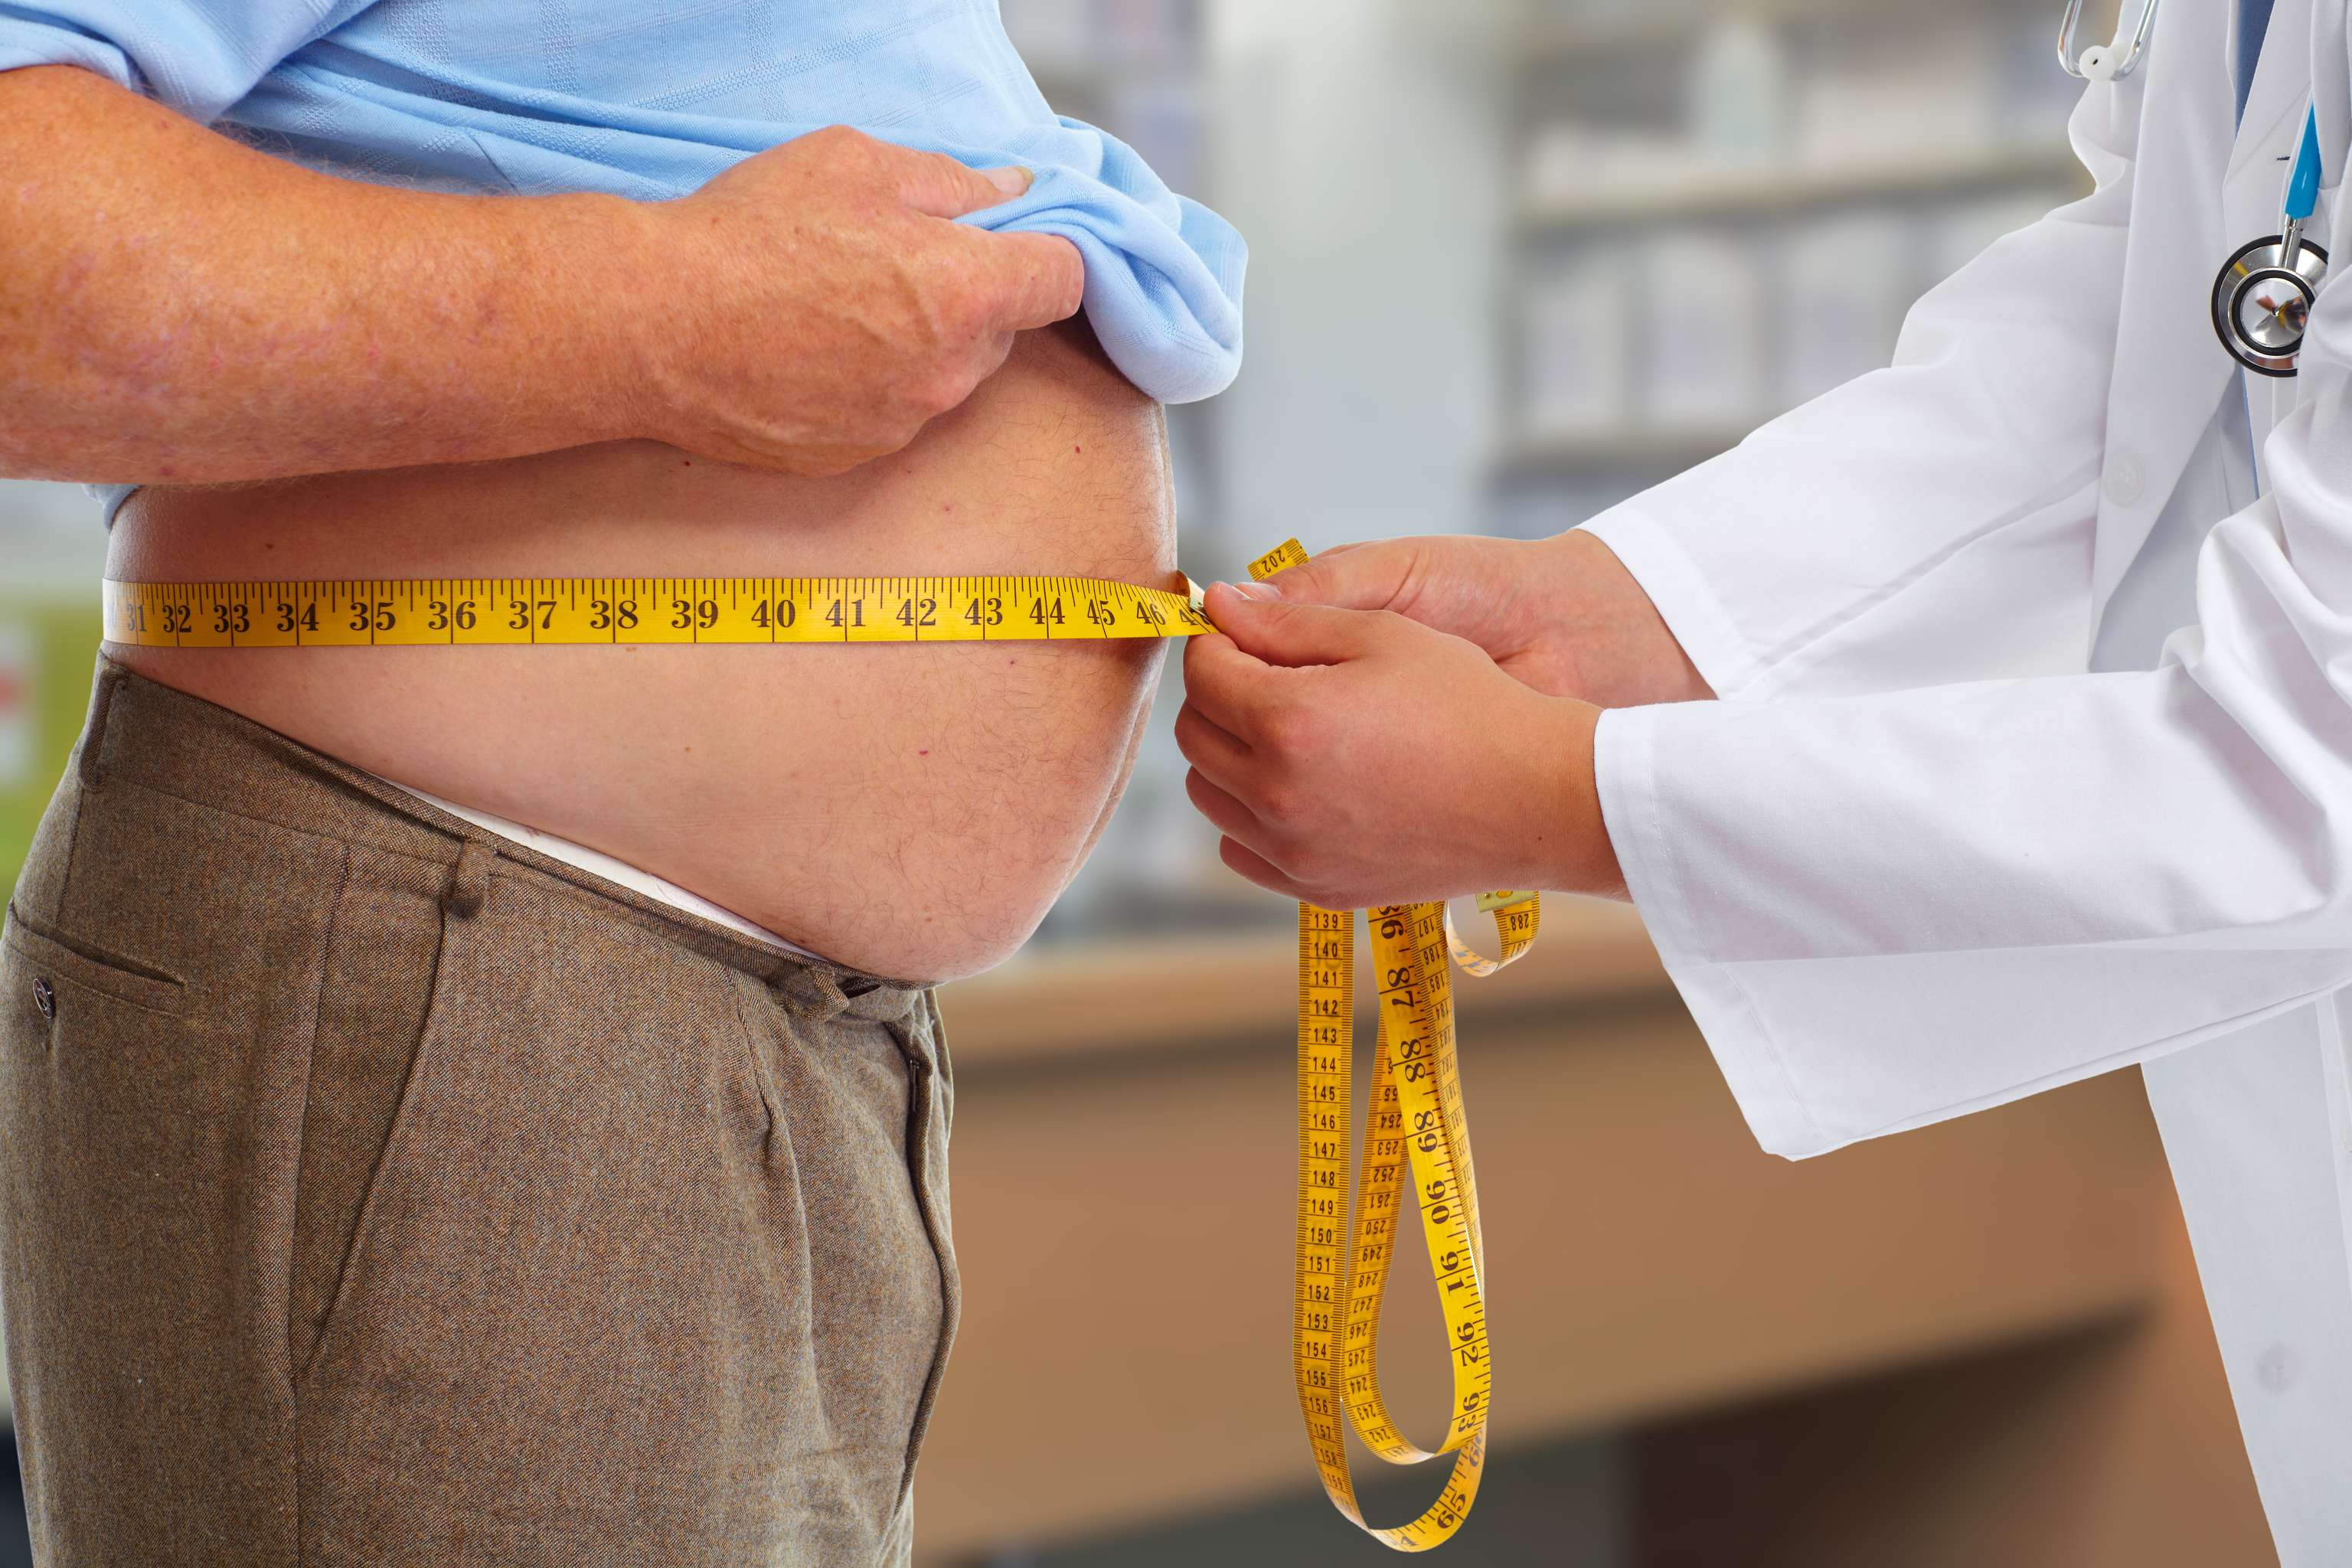 Is there a link between obesity and cancer risk?